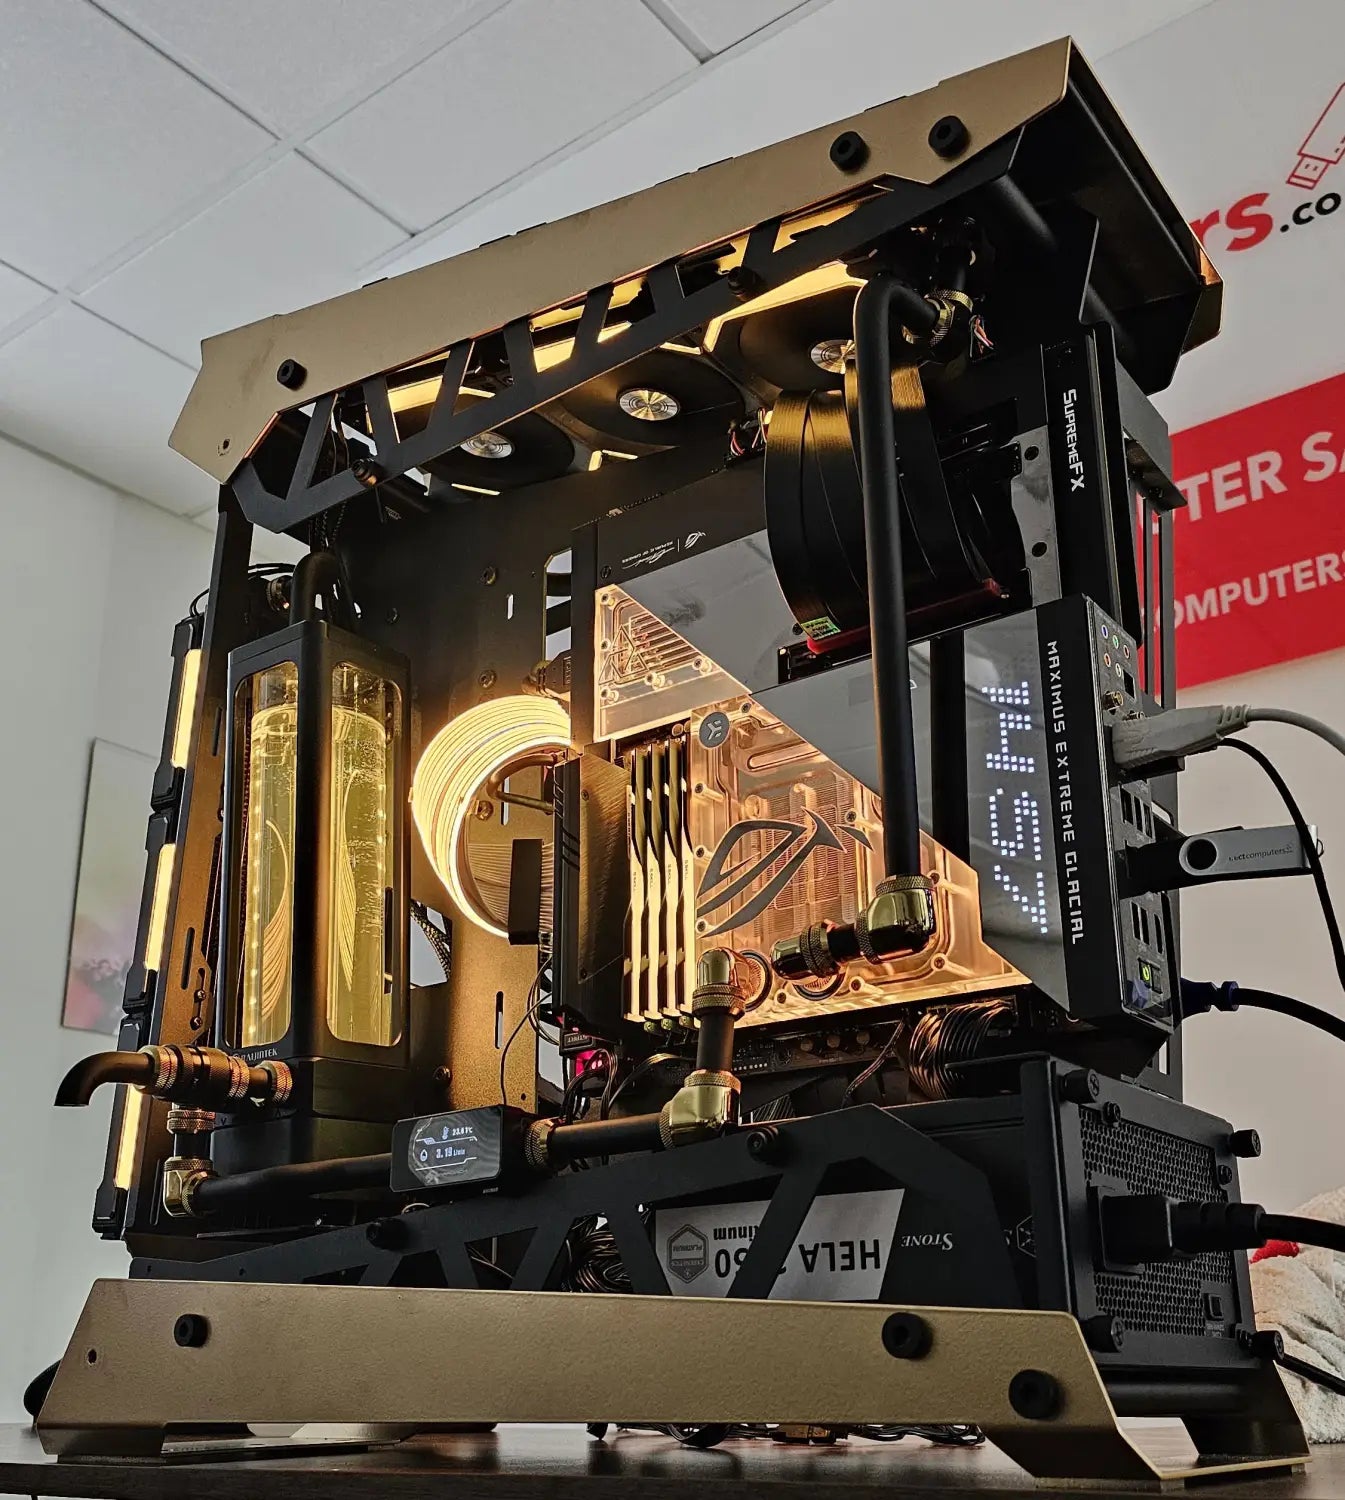 The Golden Build Part Two: The Specs